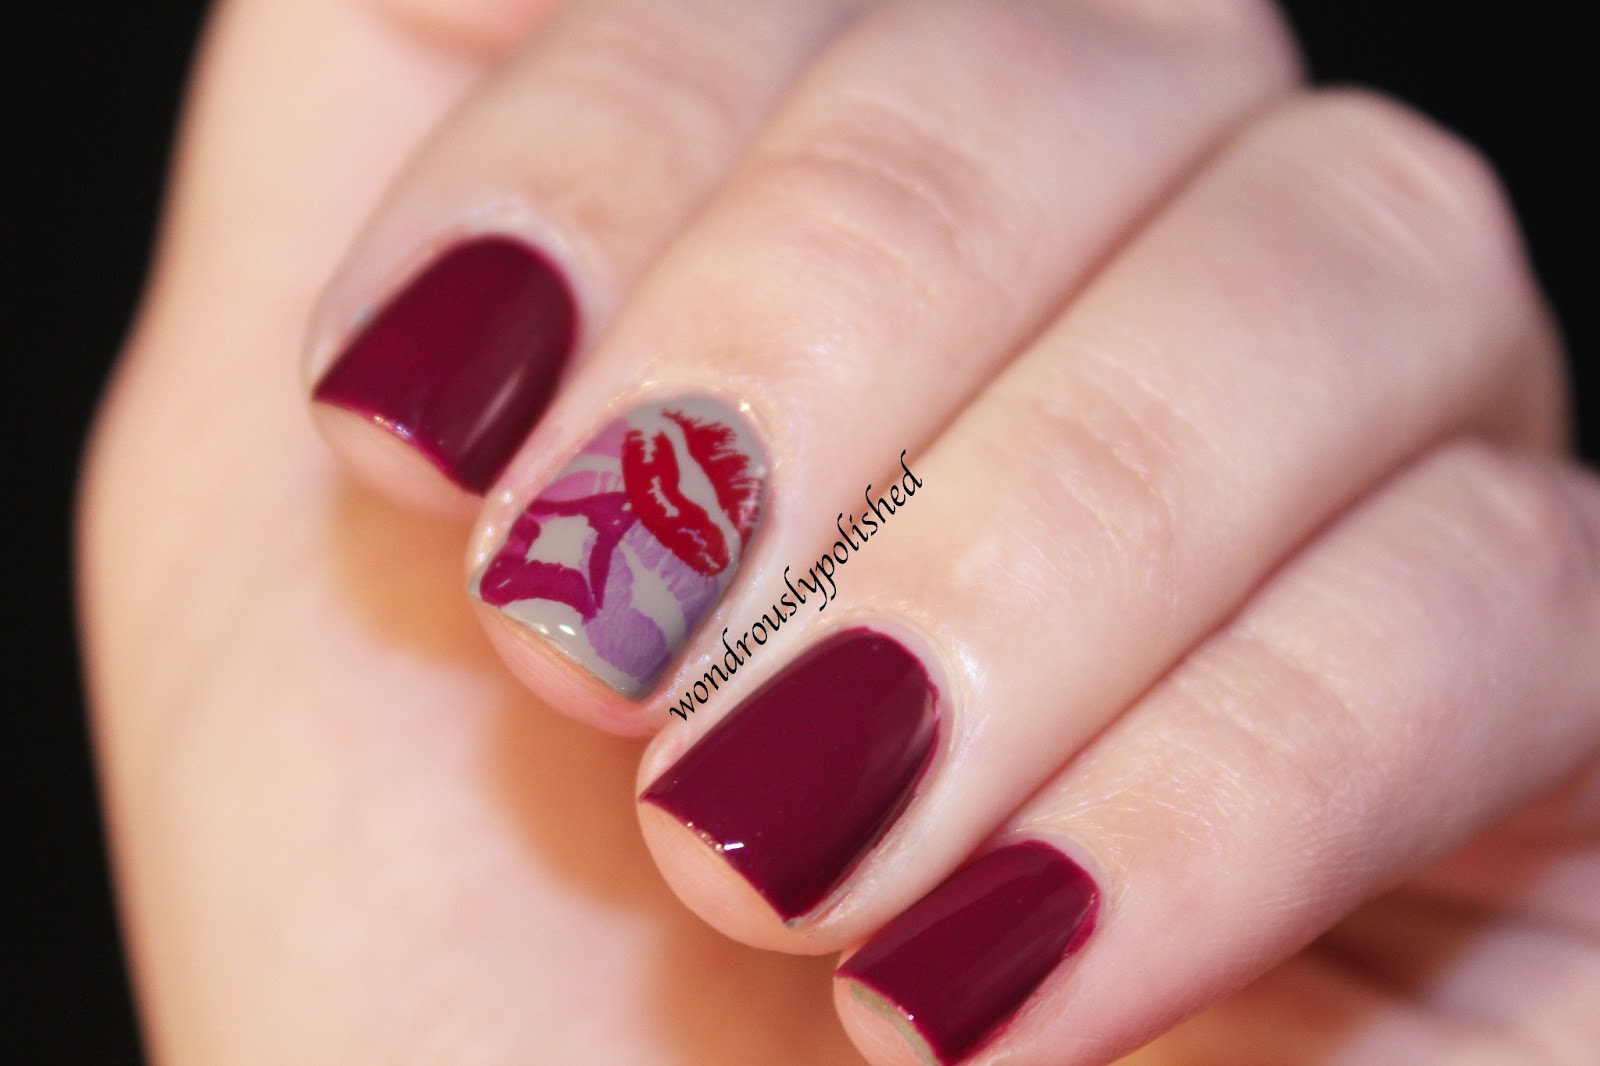 4. "Pretty Holiday Nail Colors That Will Make You Stand Out" - wide 2